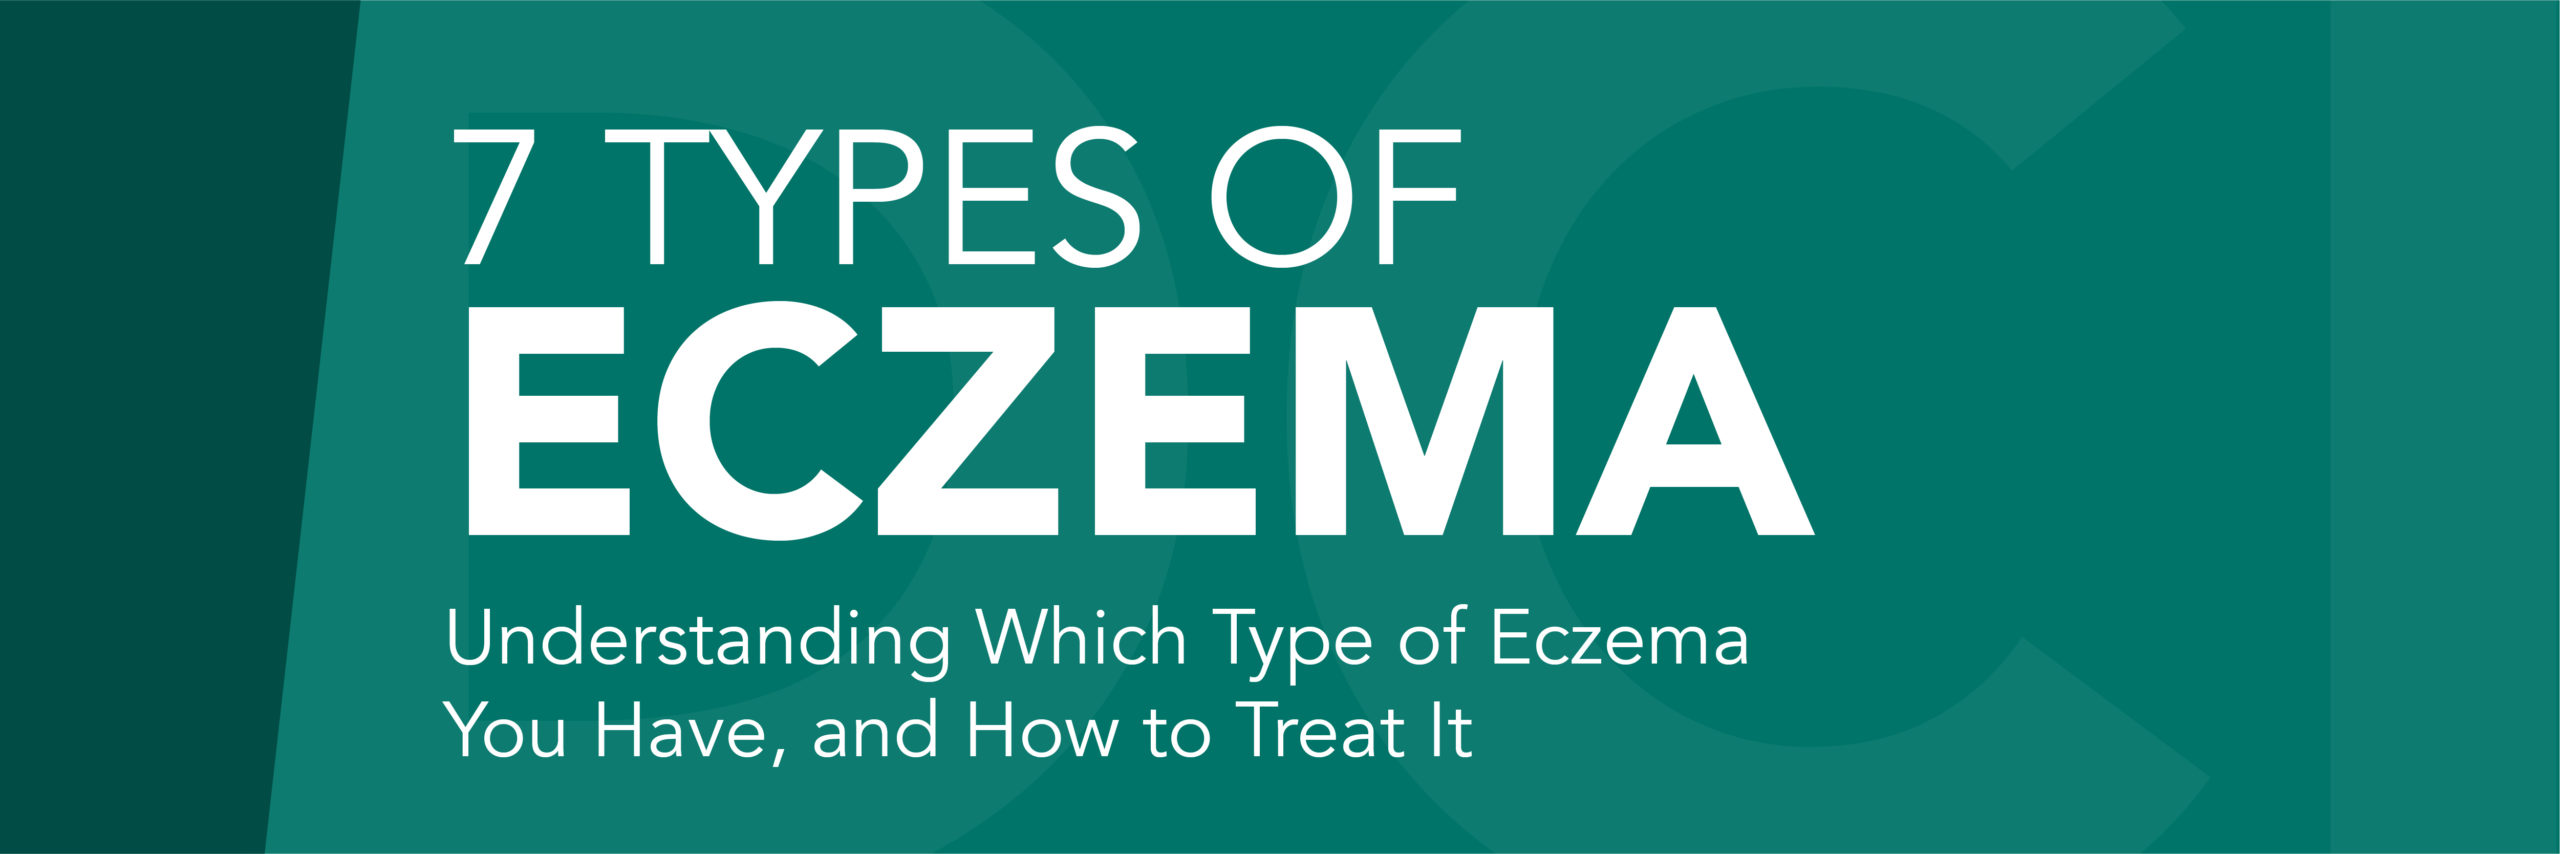 What Are the Most Common Types of Eczema?